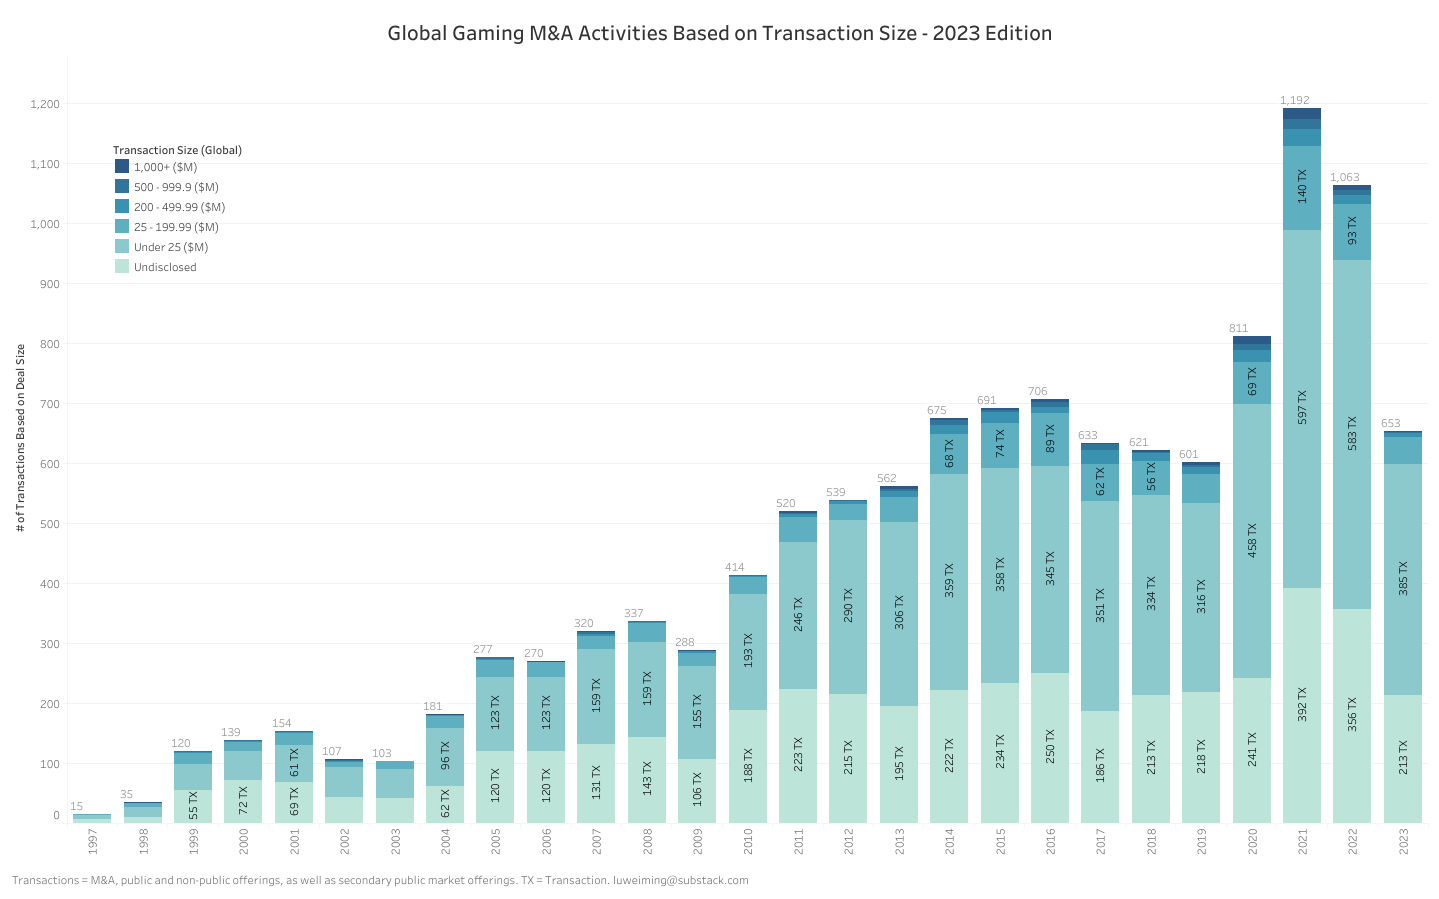 Global Gaming M&A Activities Based on Transaction Size - 2023 Edition